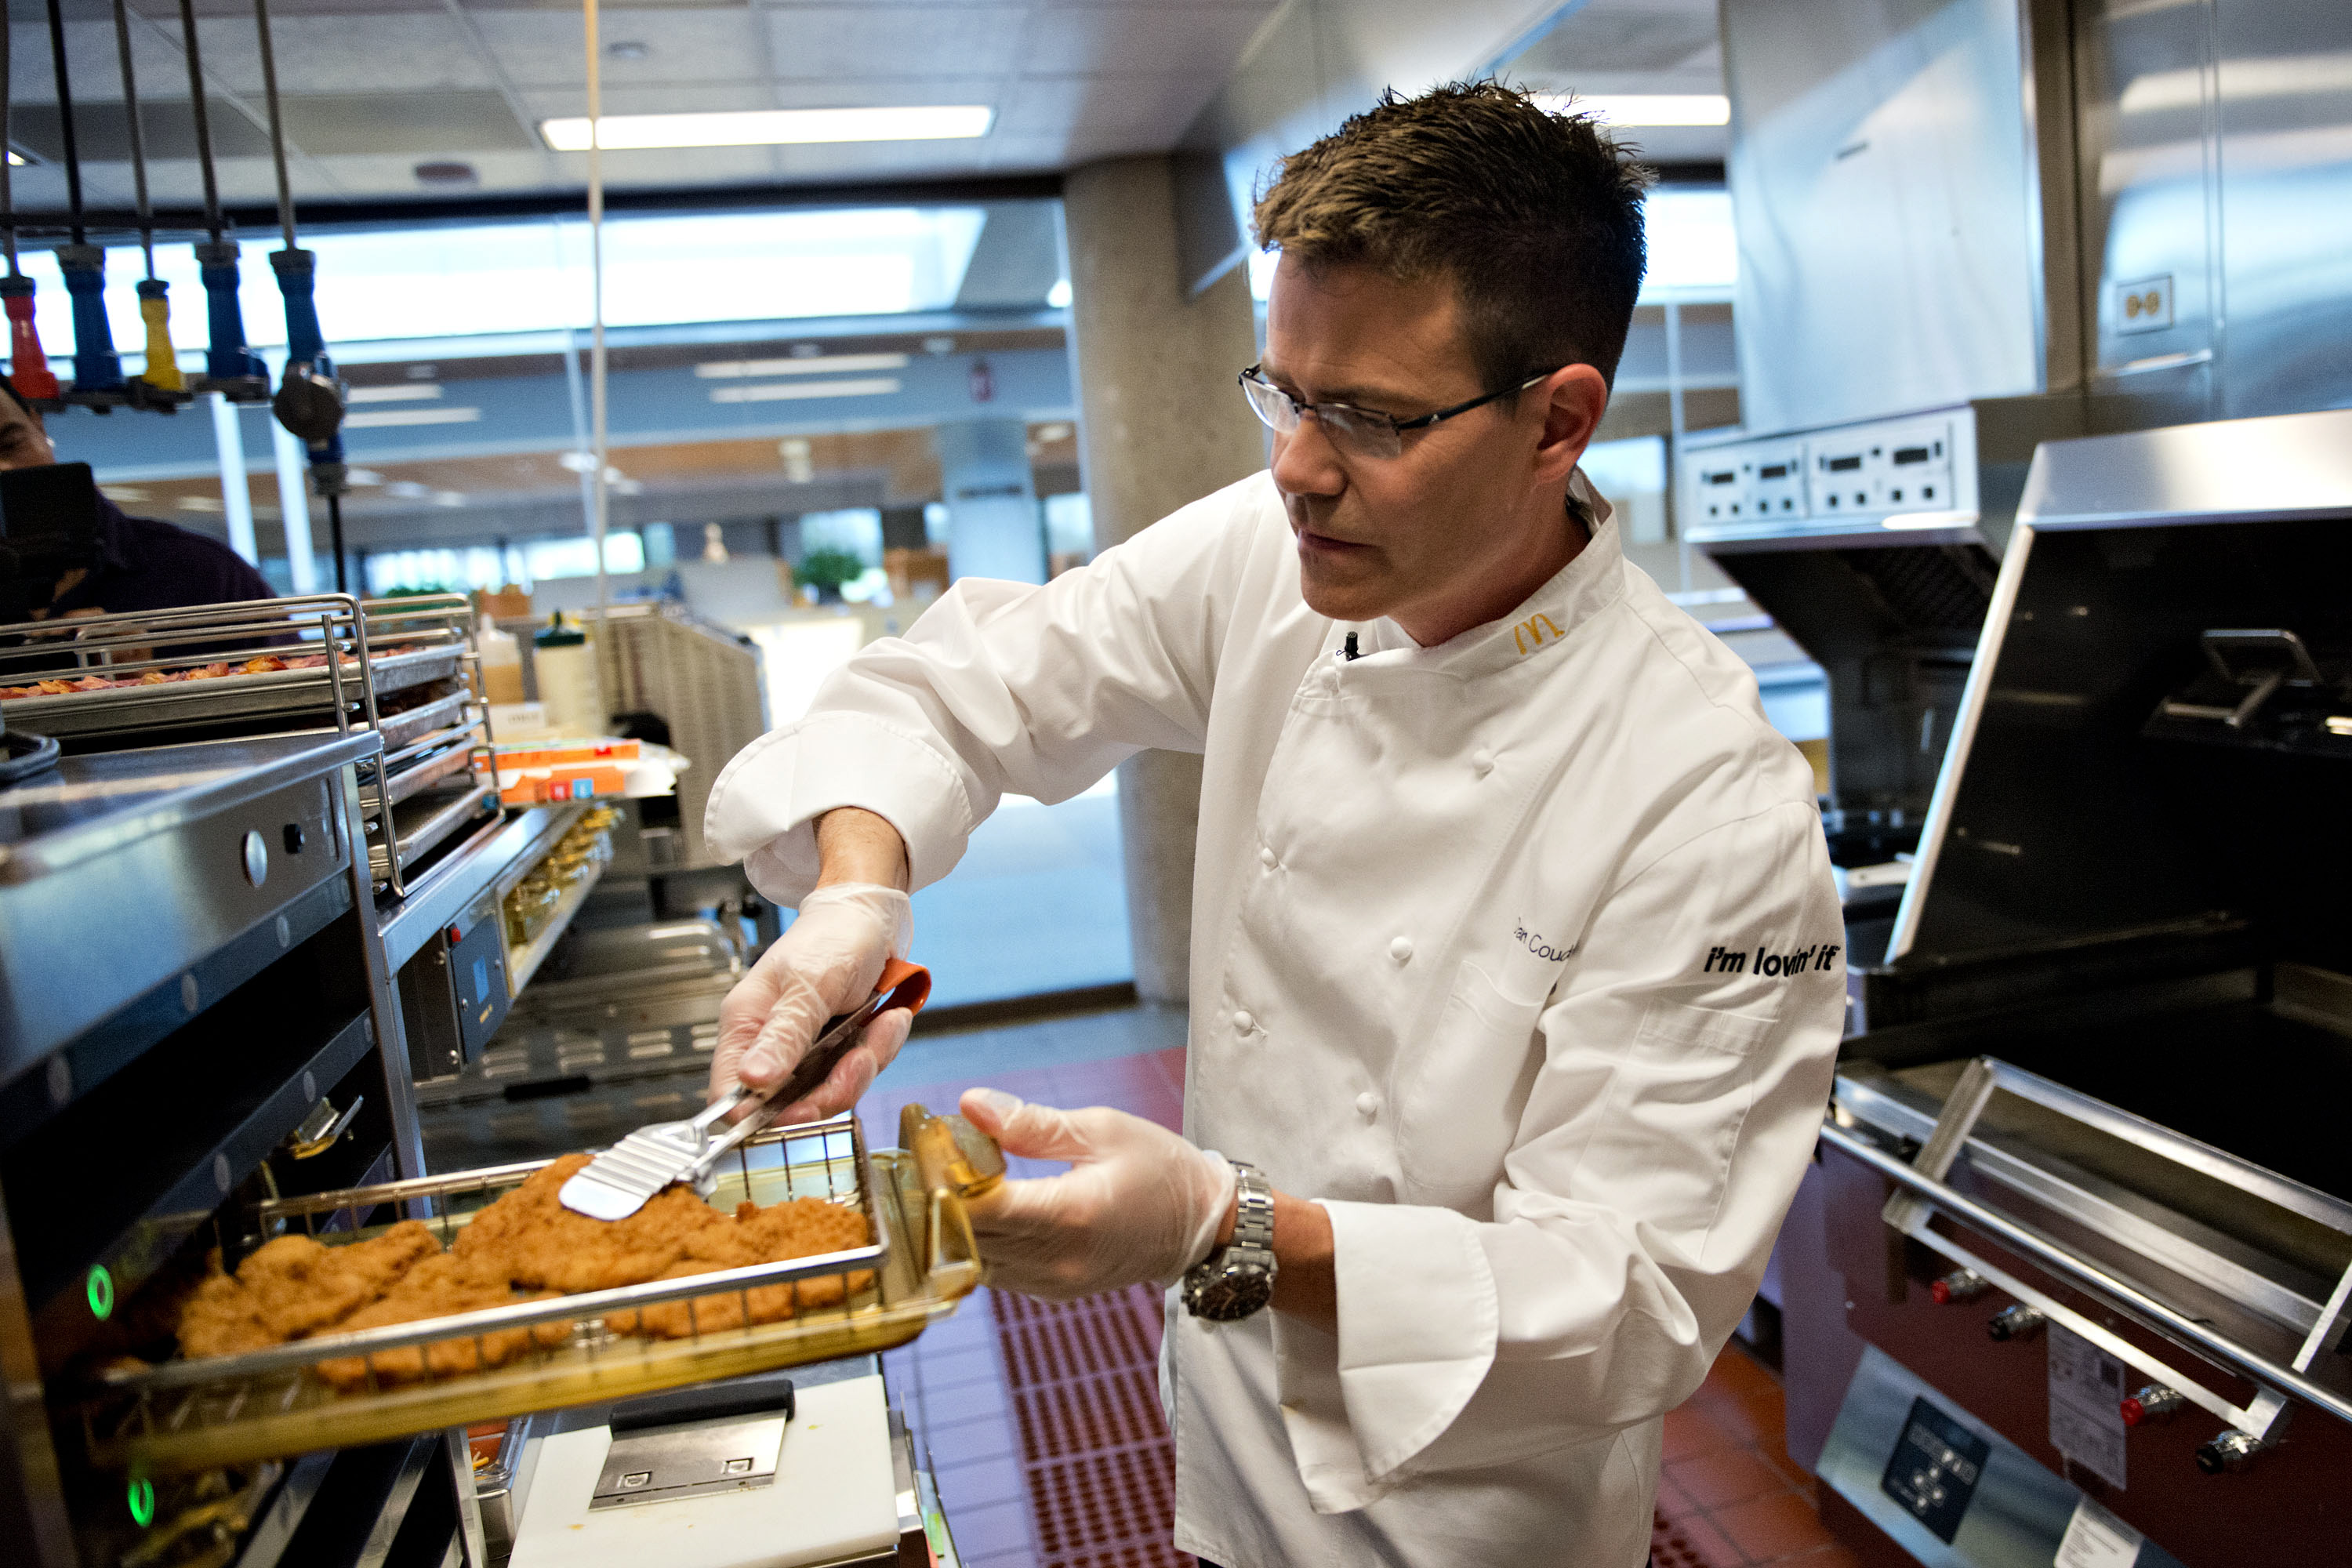 Dan Coudreaut, executive chef and director of culinary innovation for McDonald's Corp., prepares a McWrap in a test kitchen at McDonald's headquarters in Oak Brook, Illinois, U.S., on Tuesday, July 23, 2013. Coudreaut graduated from the Culinary Institute of America at the top of his class, ran the kitchen at the Four Seasons Resort and Club in Dallas and joined McDonalds in 2004. Photographer: Daniel Acker/Bloomberg via Getty Images